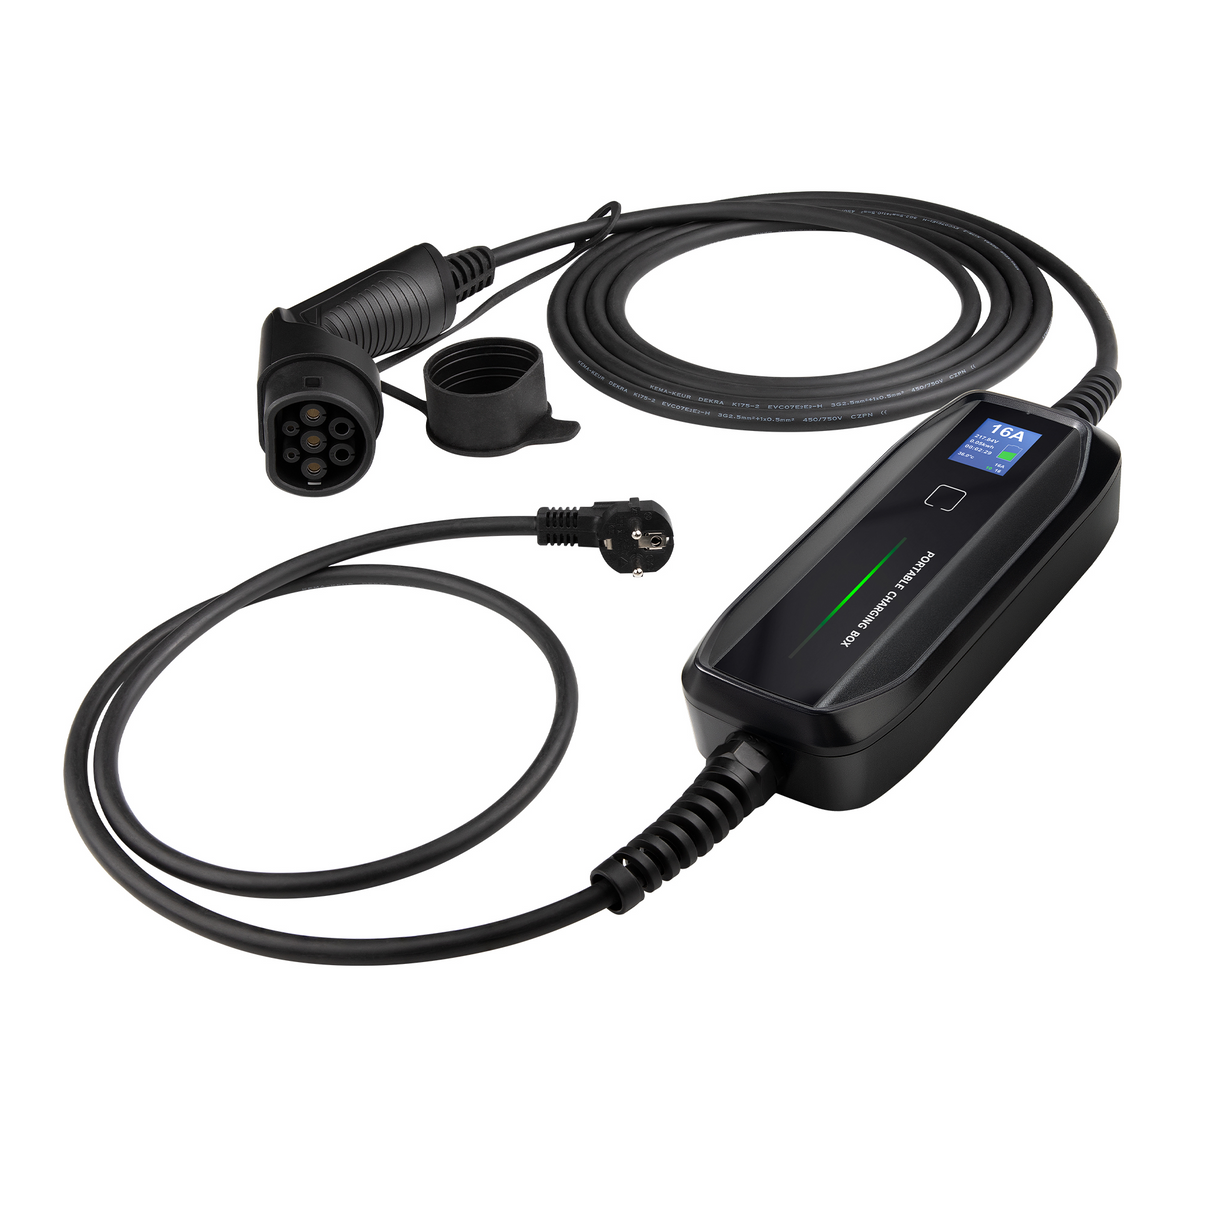 Mobile Charger Genesis GV60 - LCD Black Type 2 to Schuko